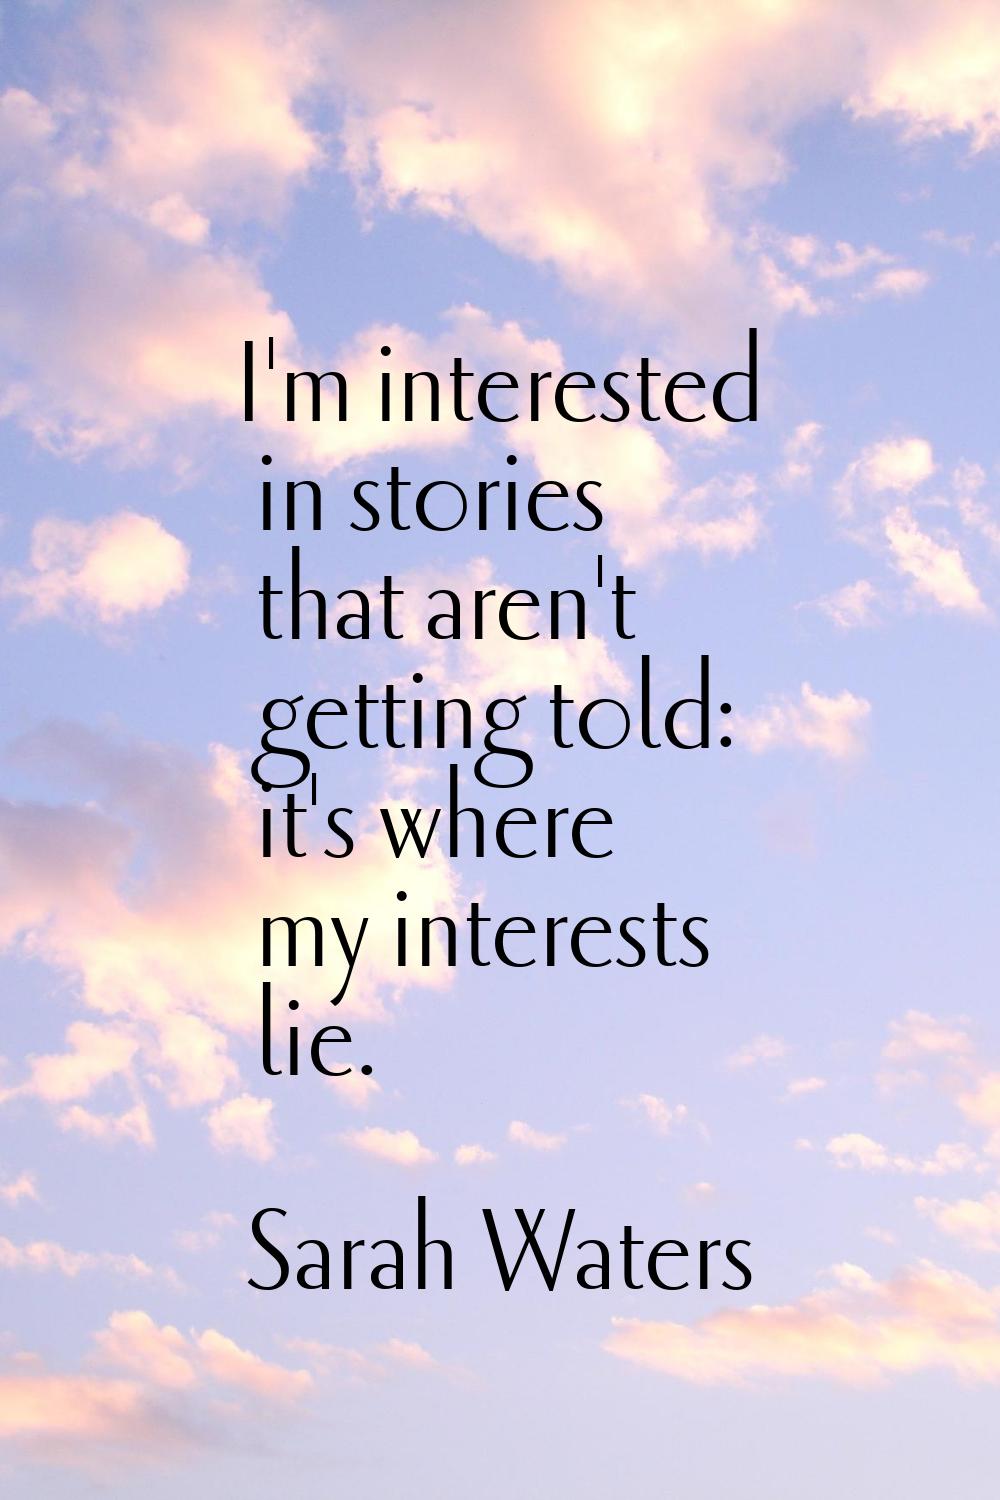 I'm interested in stories that aren't getting told: it's where my interests lie.